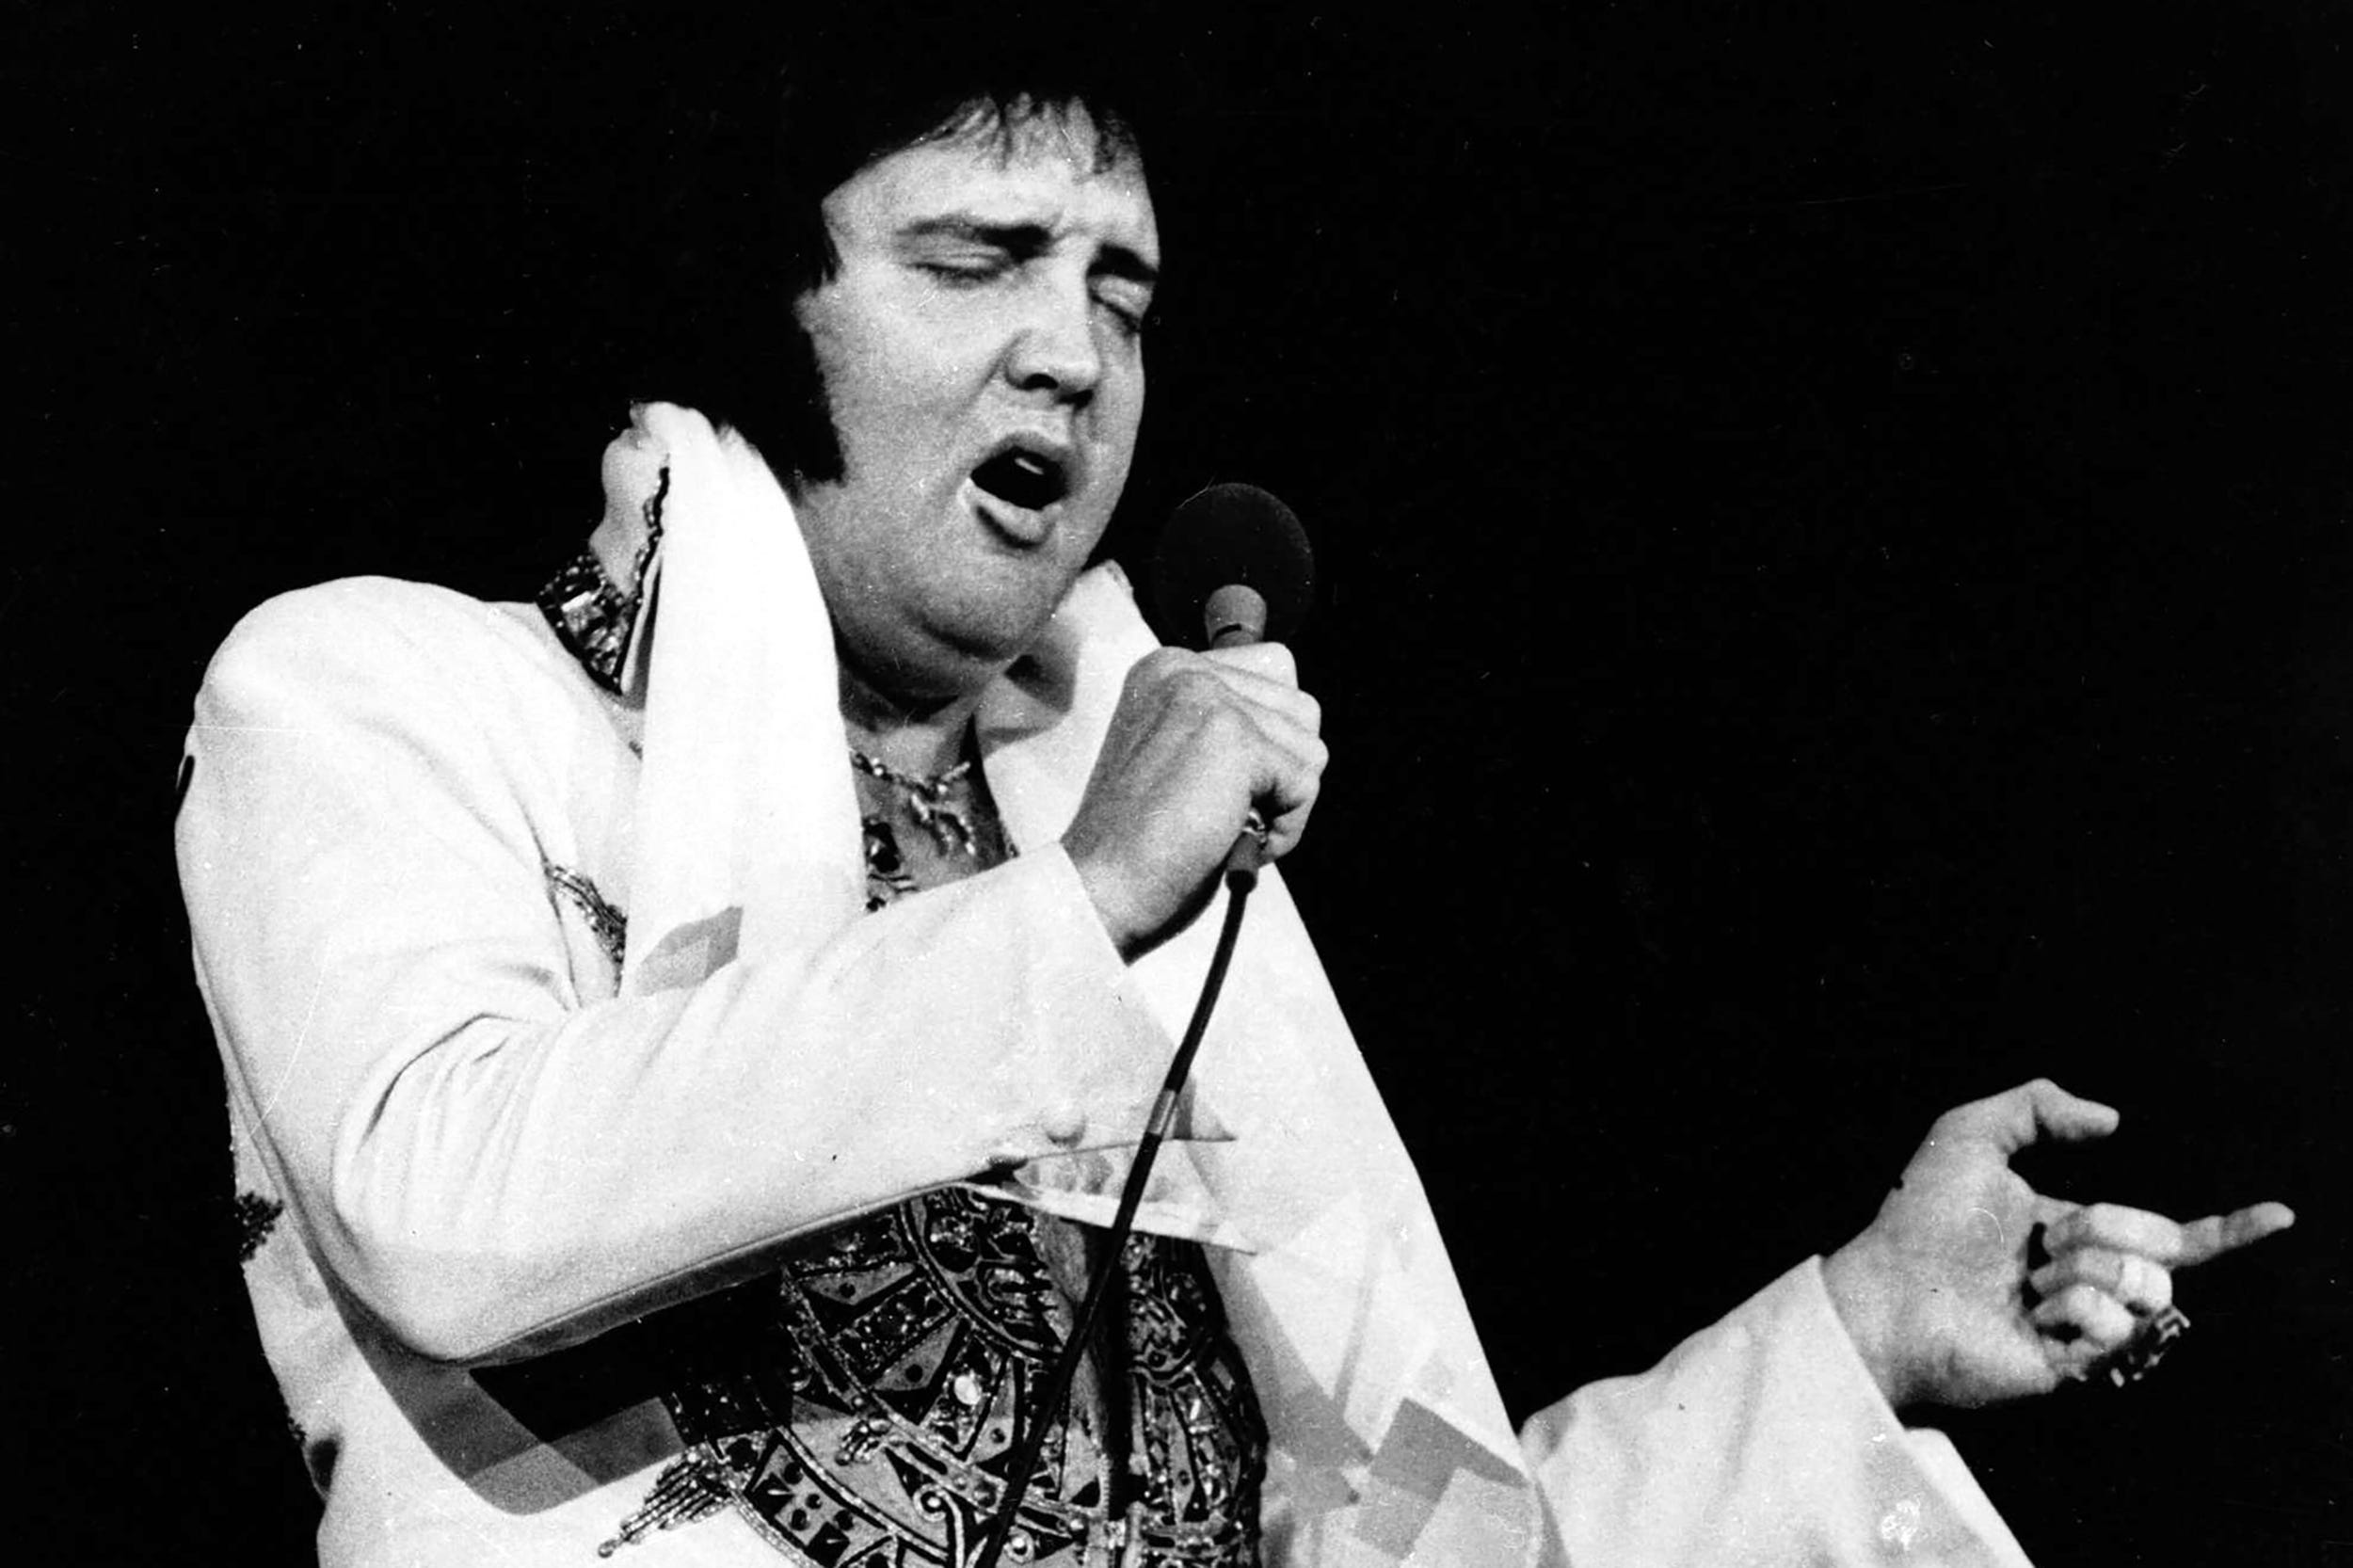 How old was Elvis when he died? 'Hound Dog' singer's cause of death.